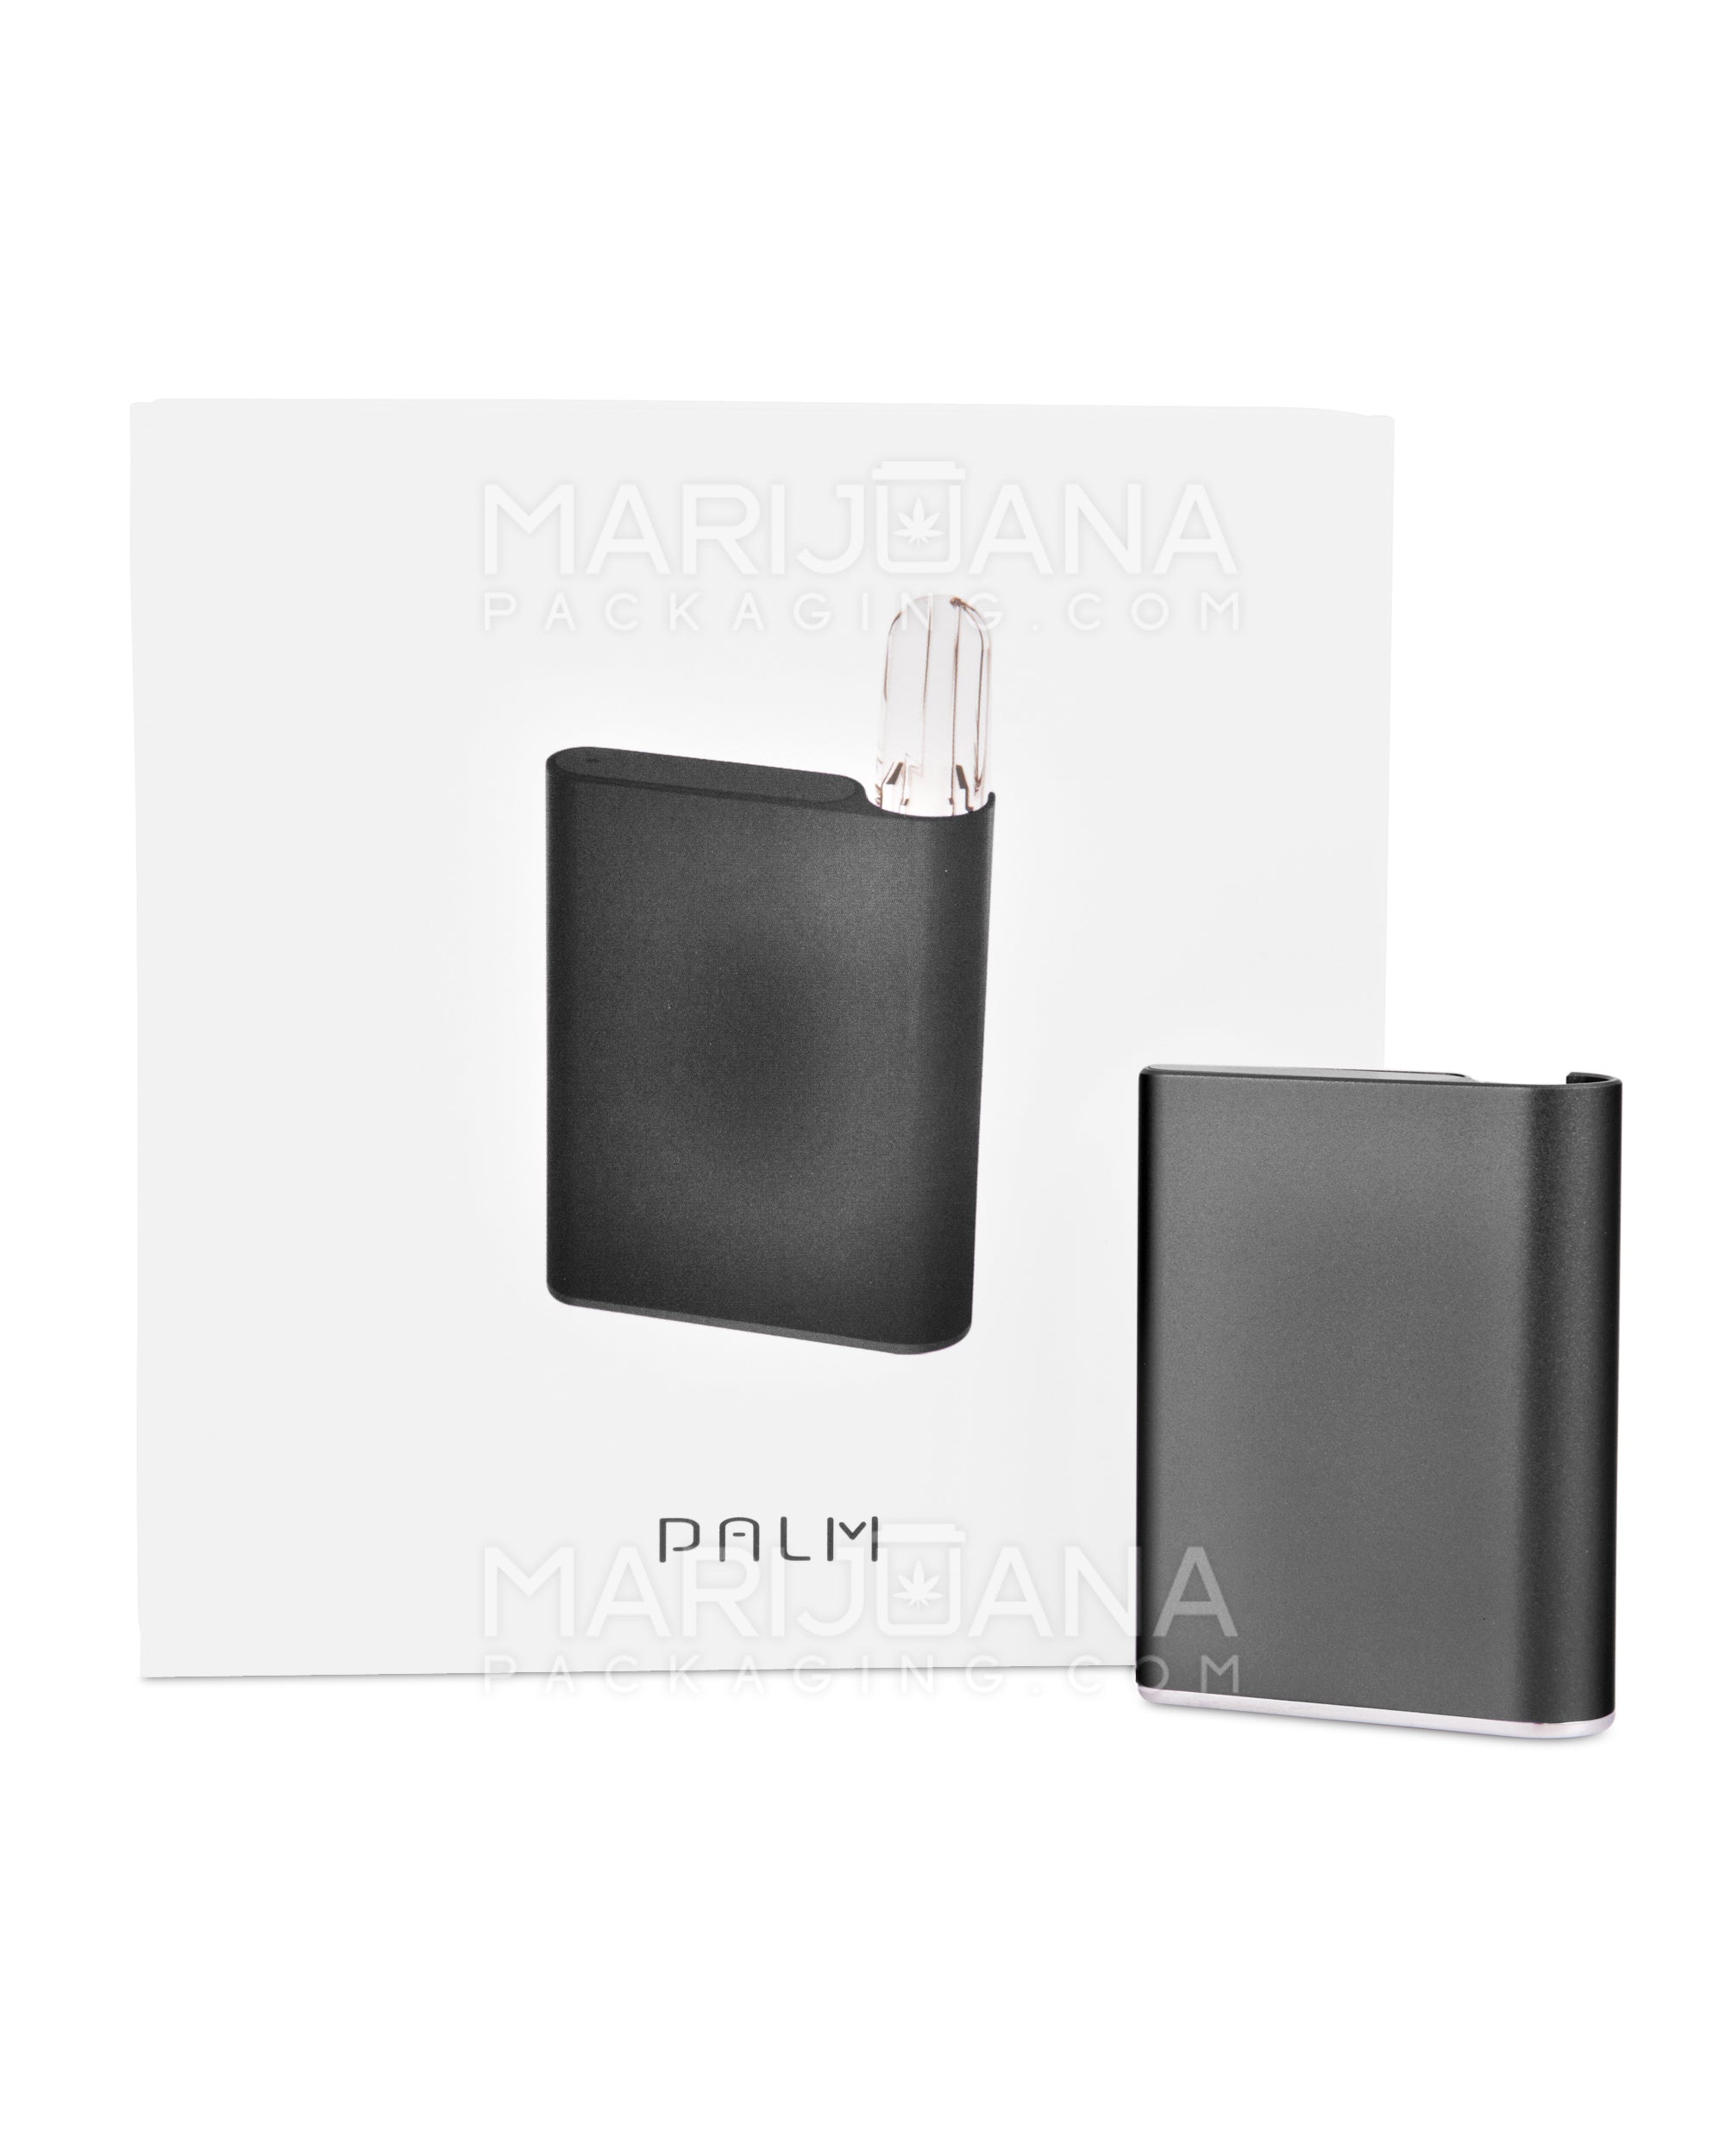 CCELL | Palm Vape Battery with USB Charger | 500mAh - Black - 510 Thread - 1